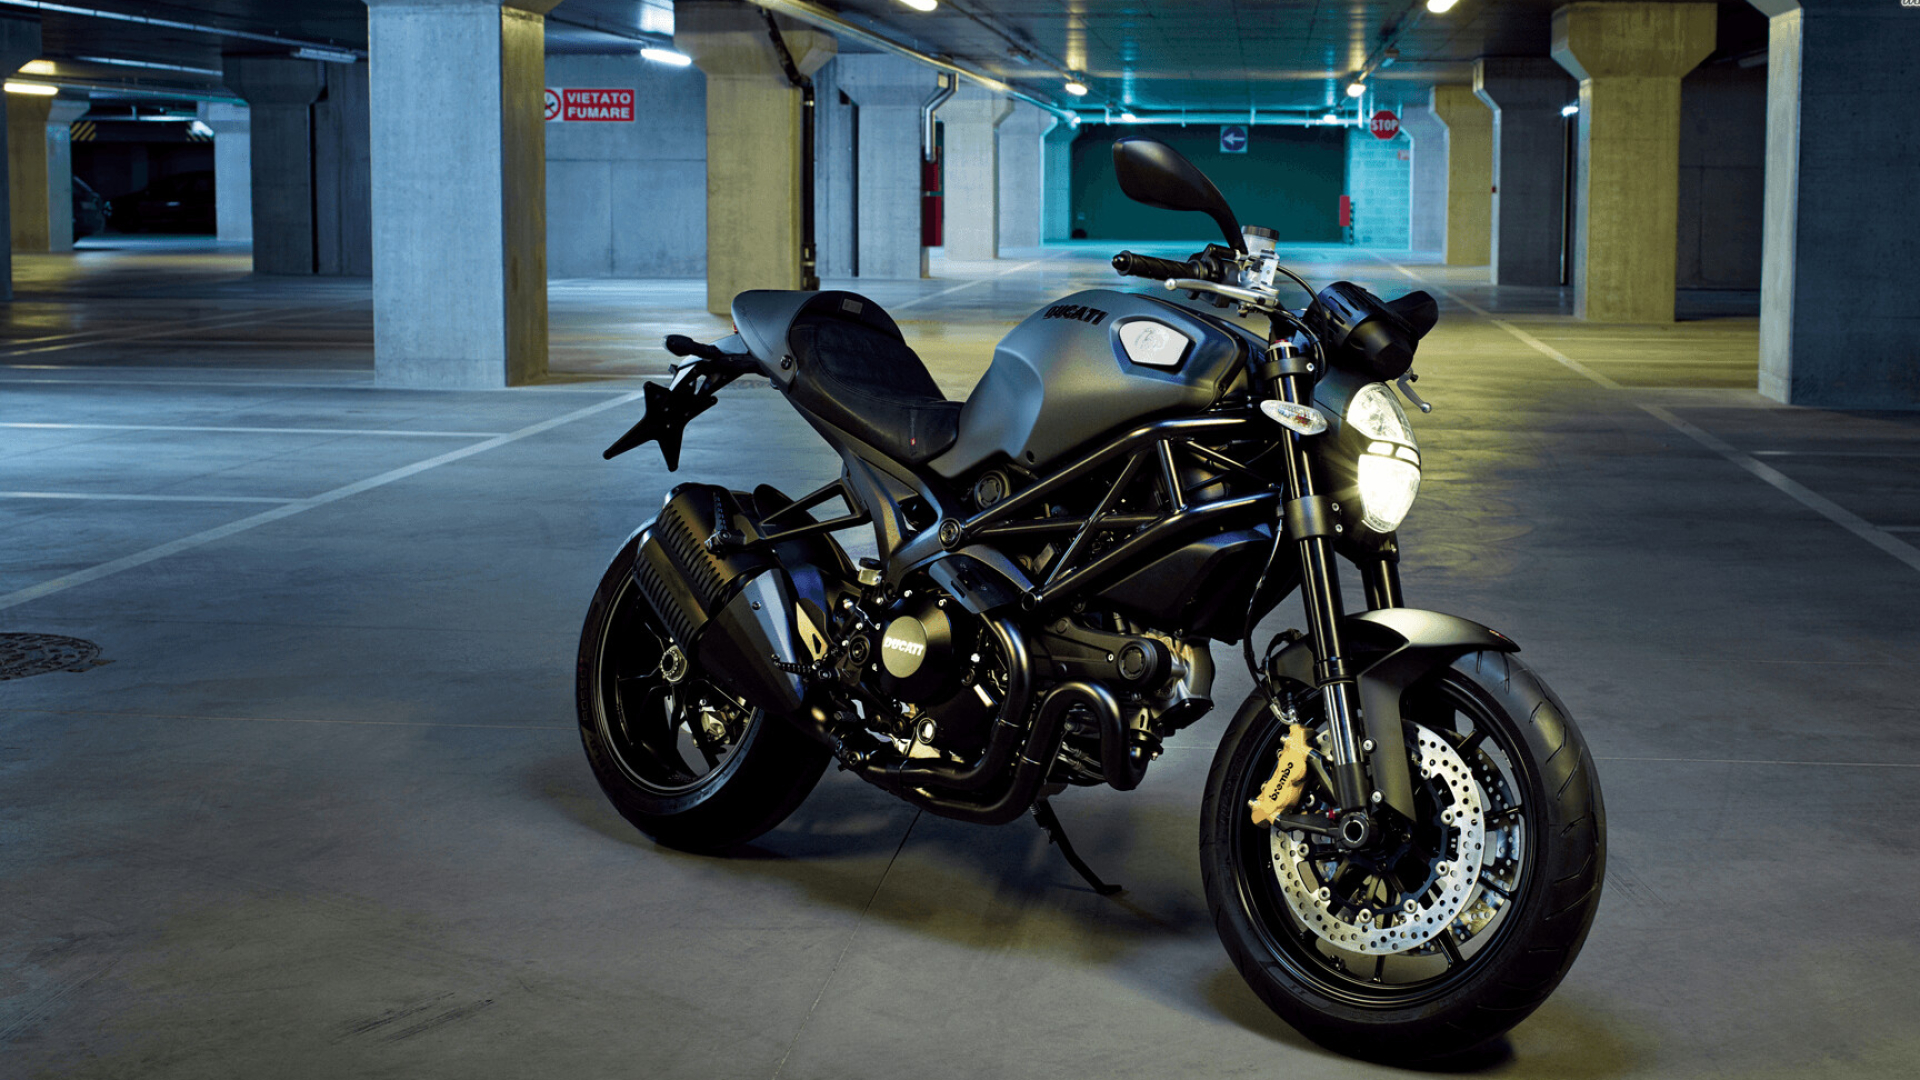 Ducati: Monster, was introduced by Miguel Angel Galluzzi in 1993, Motorcycle. 1920x1080 Full HD Background.